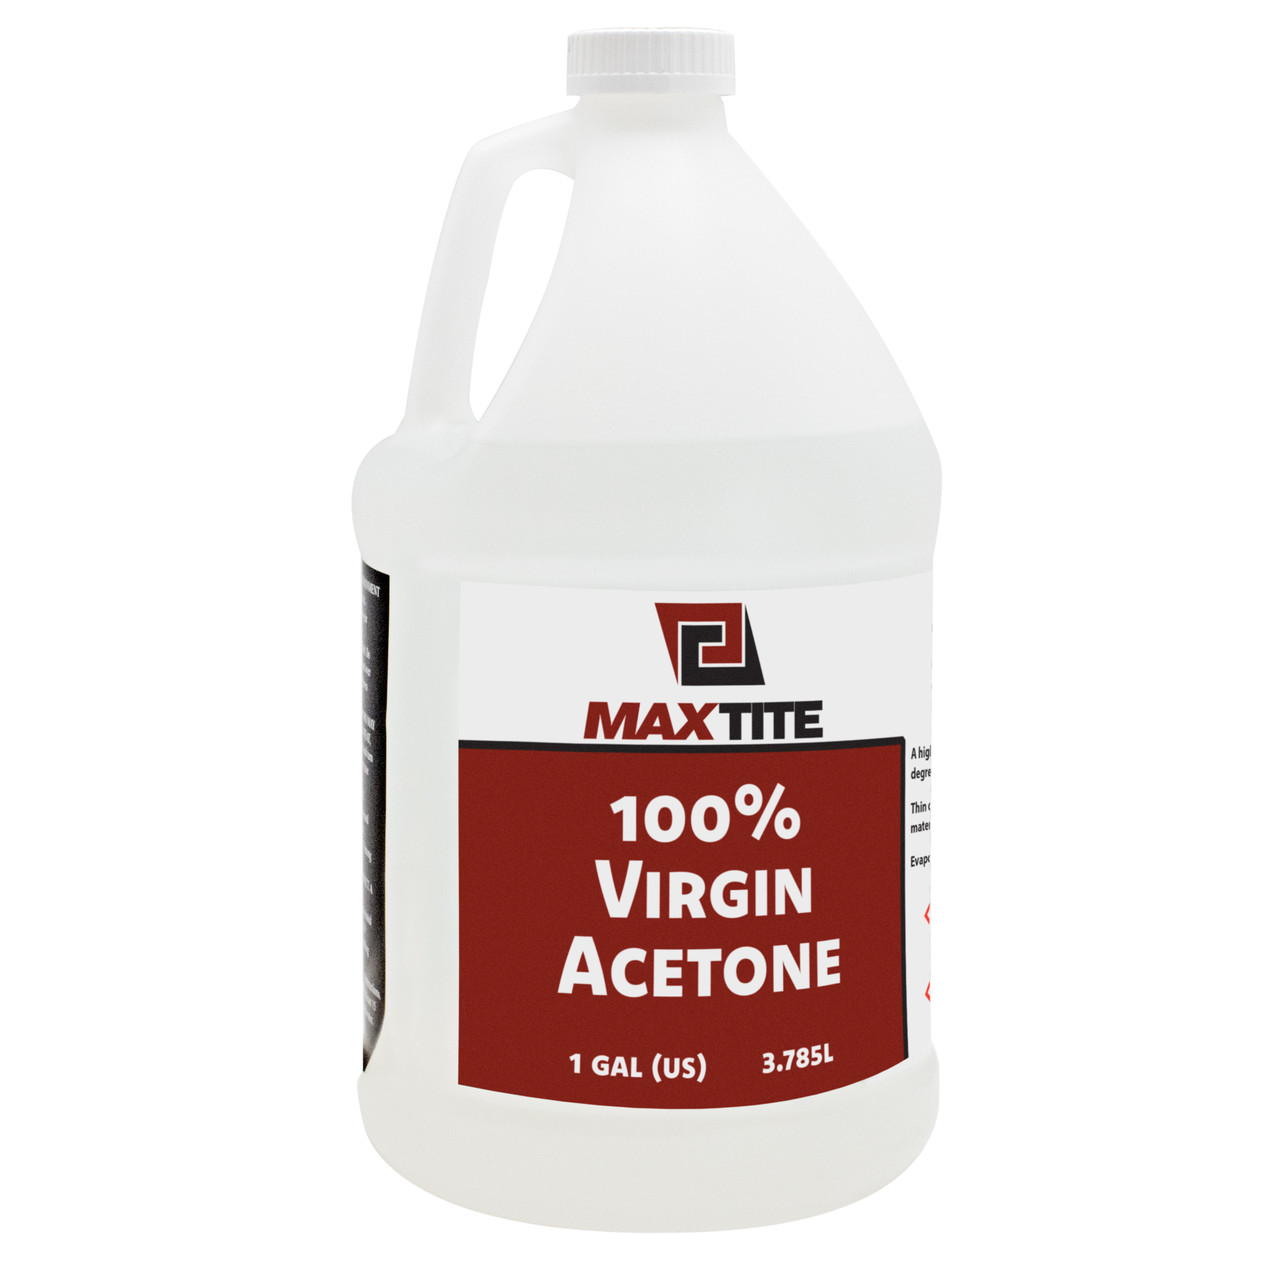 LAPALM 100% Pure Acetone Gallon (IN-STORE-PICKUP-ONLY)